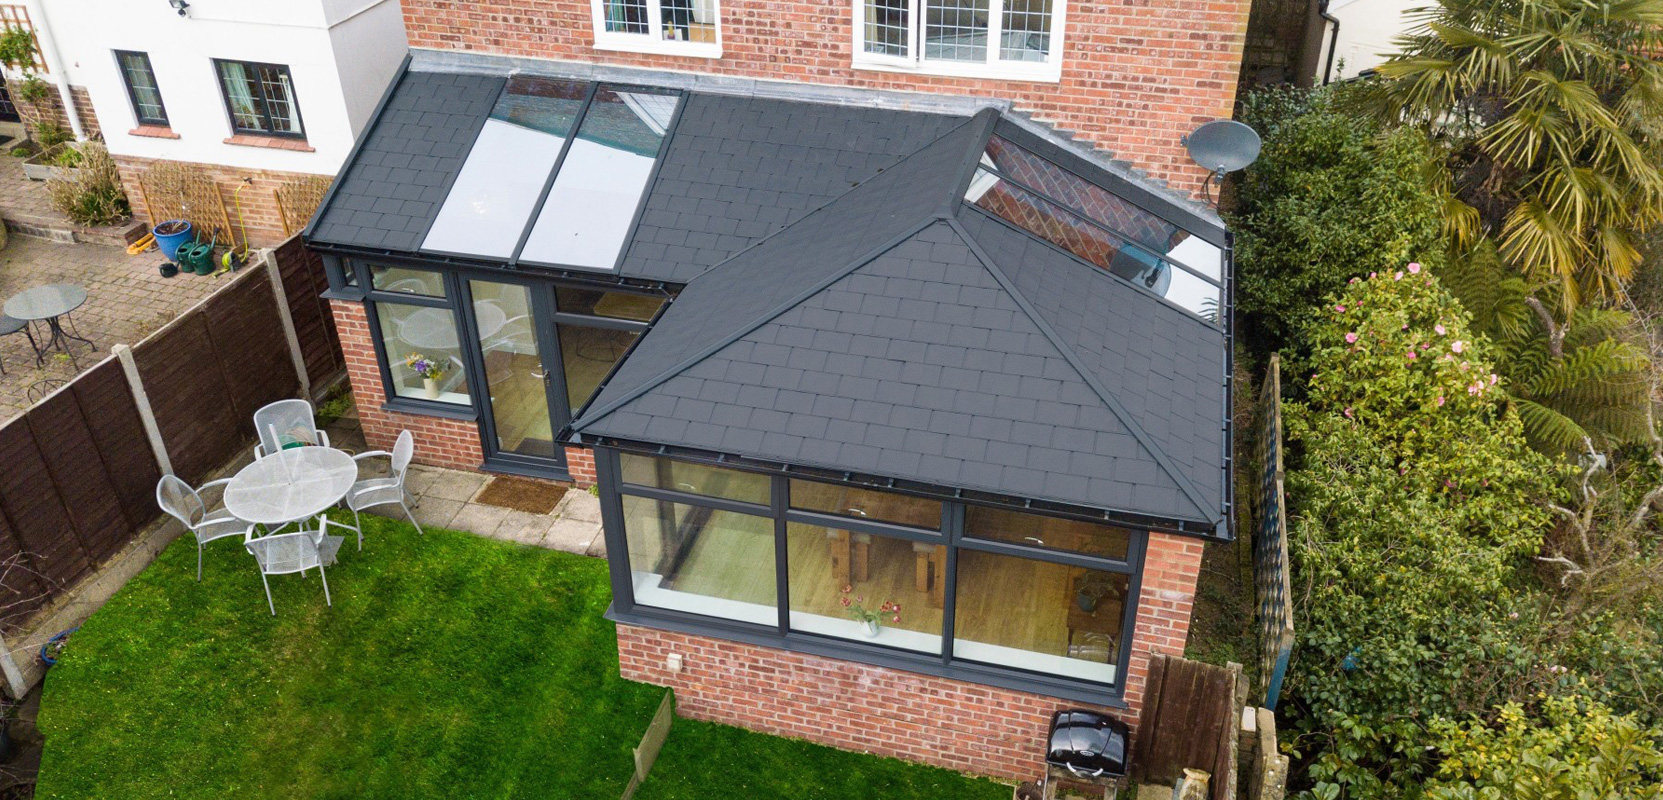 Photo of a tiled roof conservatory